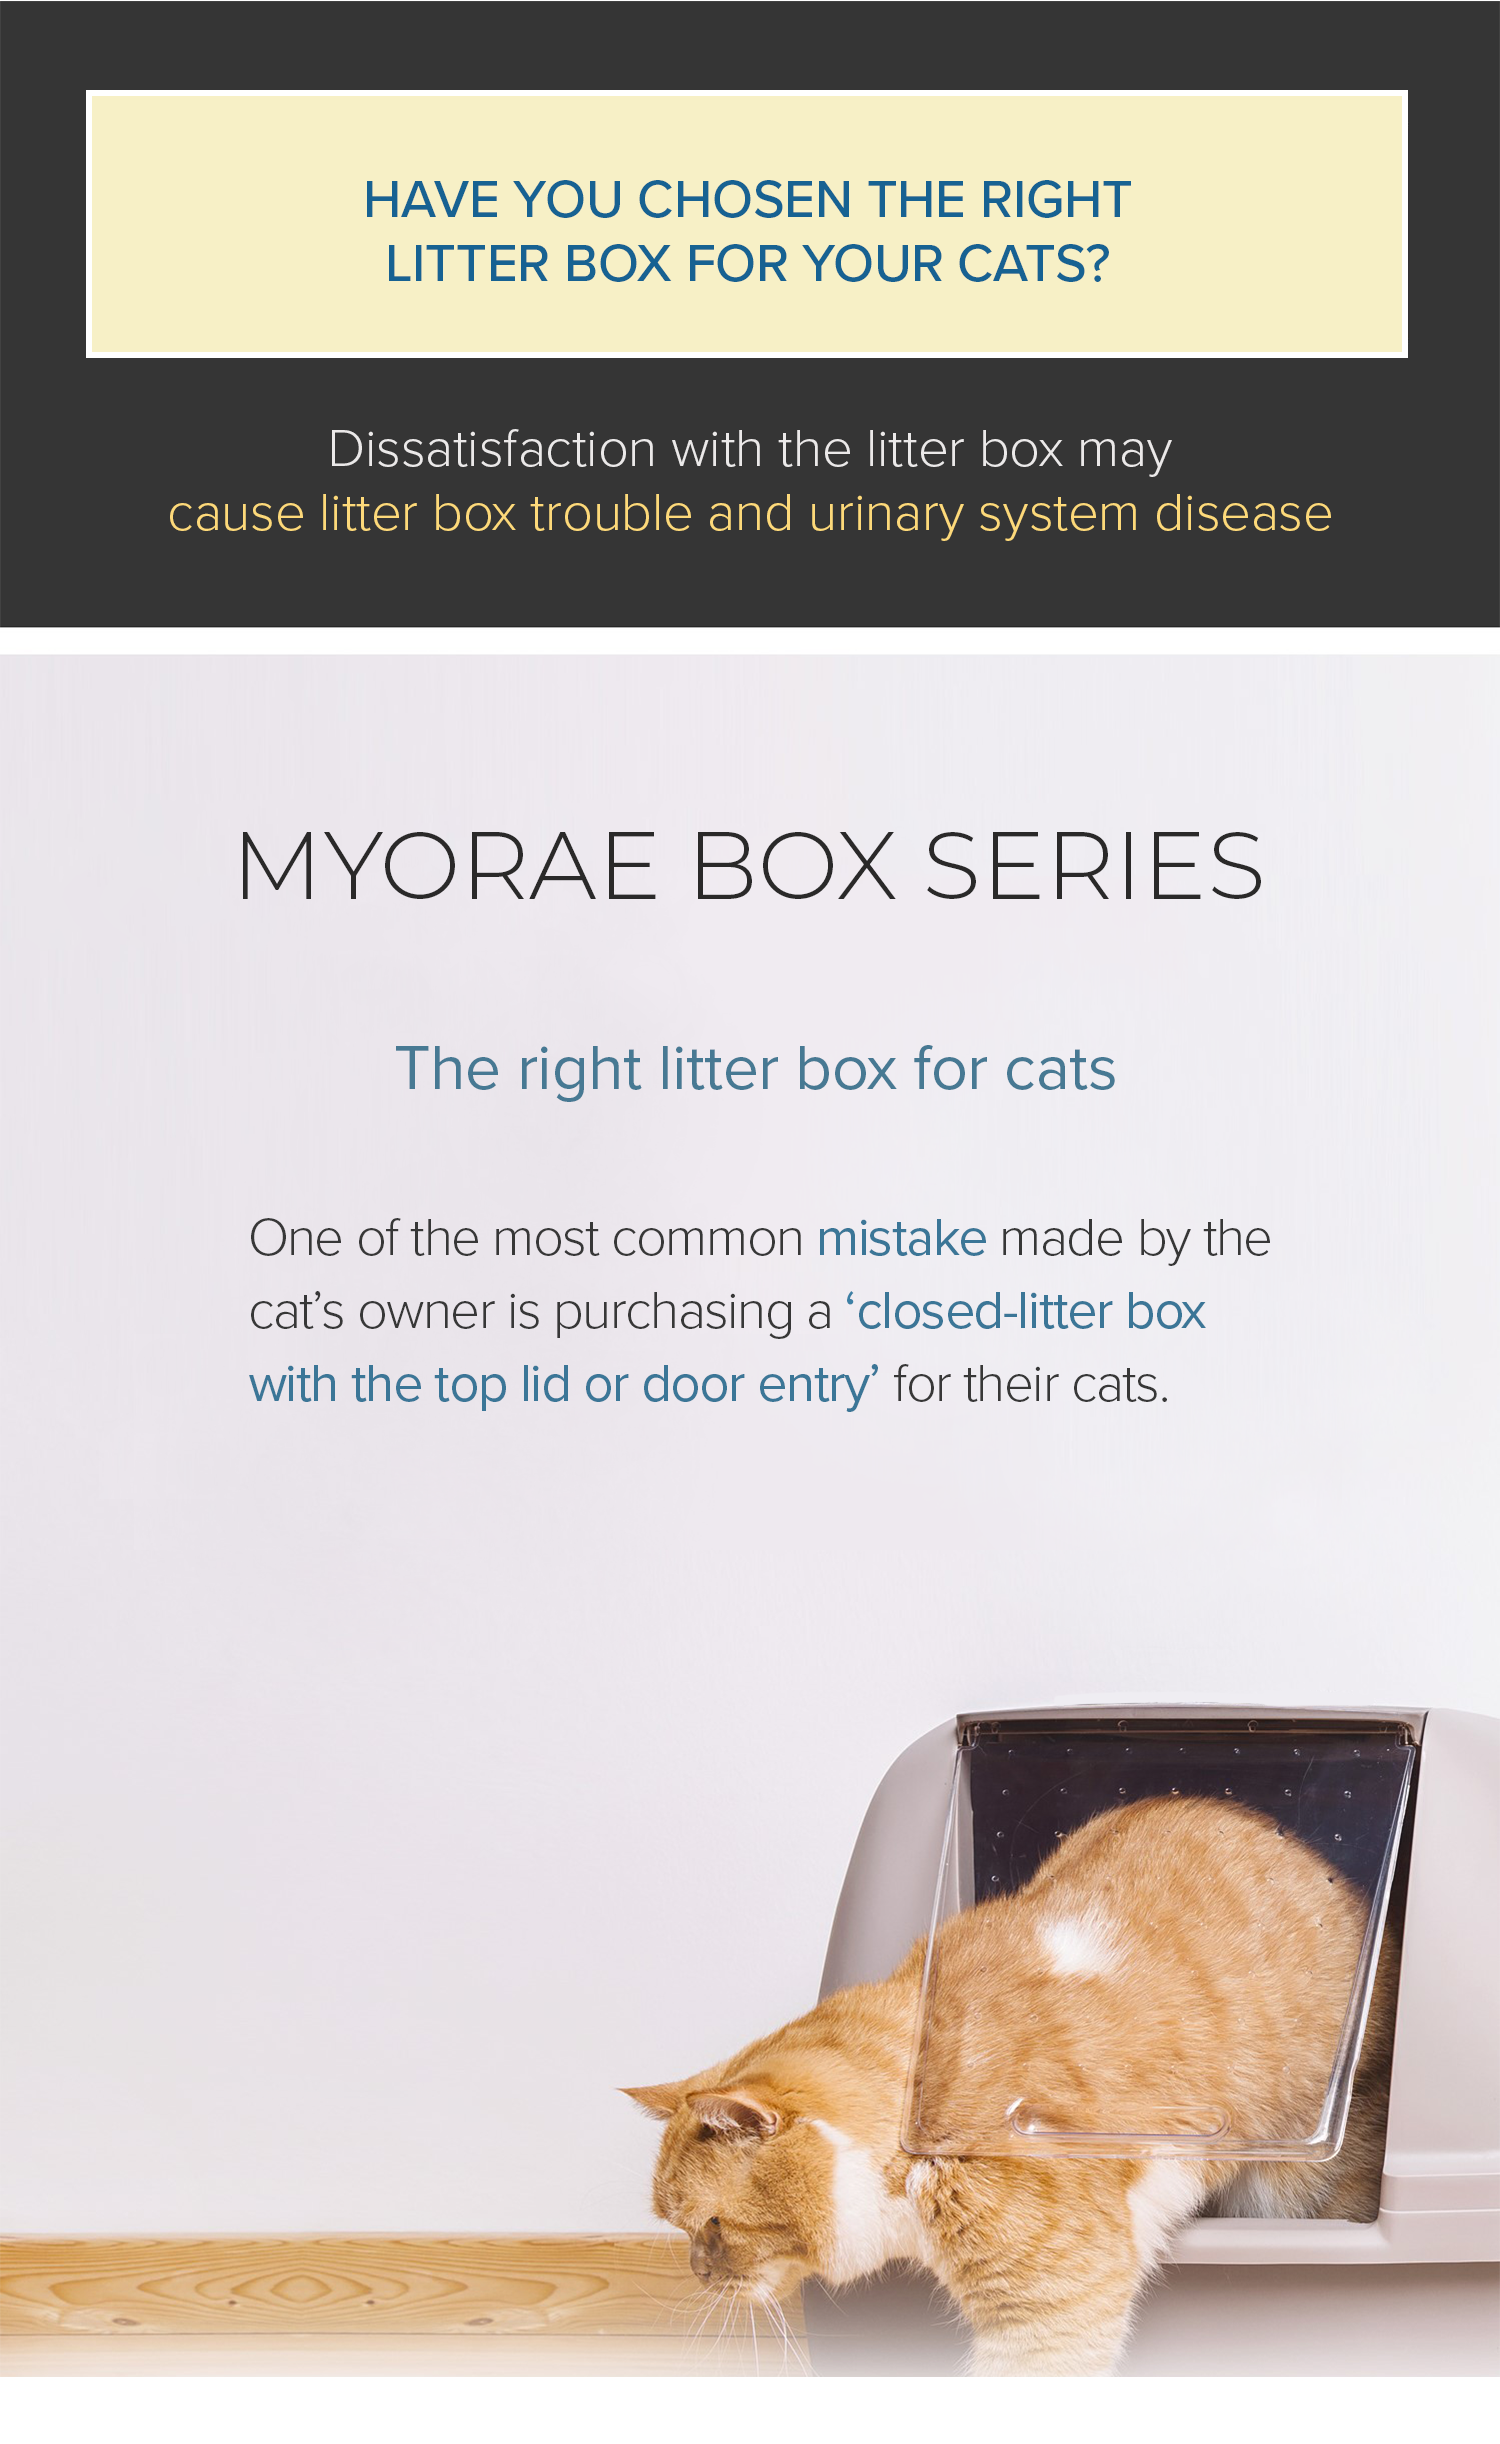 myorae box, cat litter box, largest cat litter box, exclusive extra huge cat litter box, extra large cat litter box, jumbo cat litter box, high-quality Korean product, korean cat litter box, best cat litter box, #1 cat litter box, recommended cat litter box, pink, white, mint, beige, grey, giant cat litter box, right litter box for cat, proper litter box to cat, appropriate cat litter box, opened cat litter box, cat litter box without llid, cat litter box without cover 